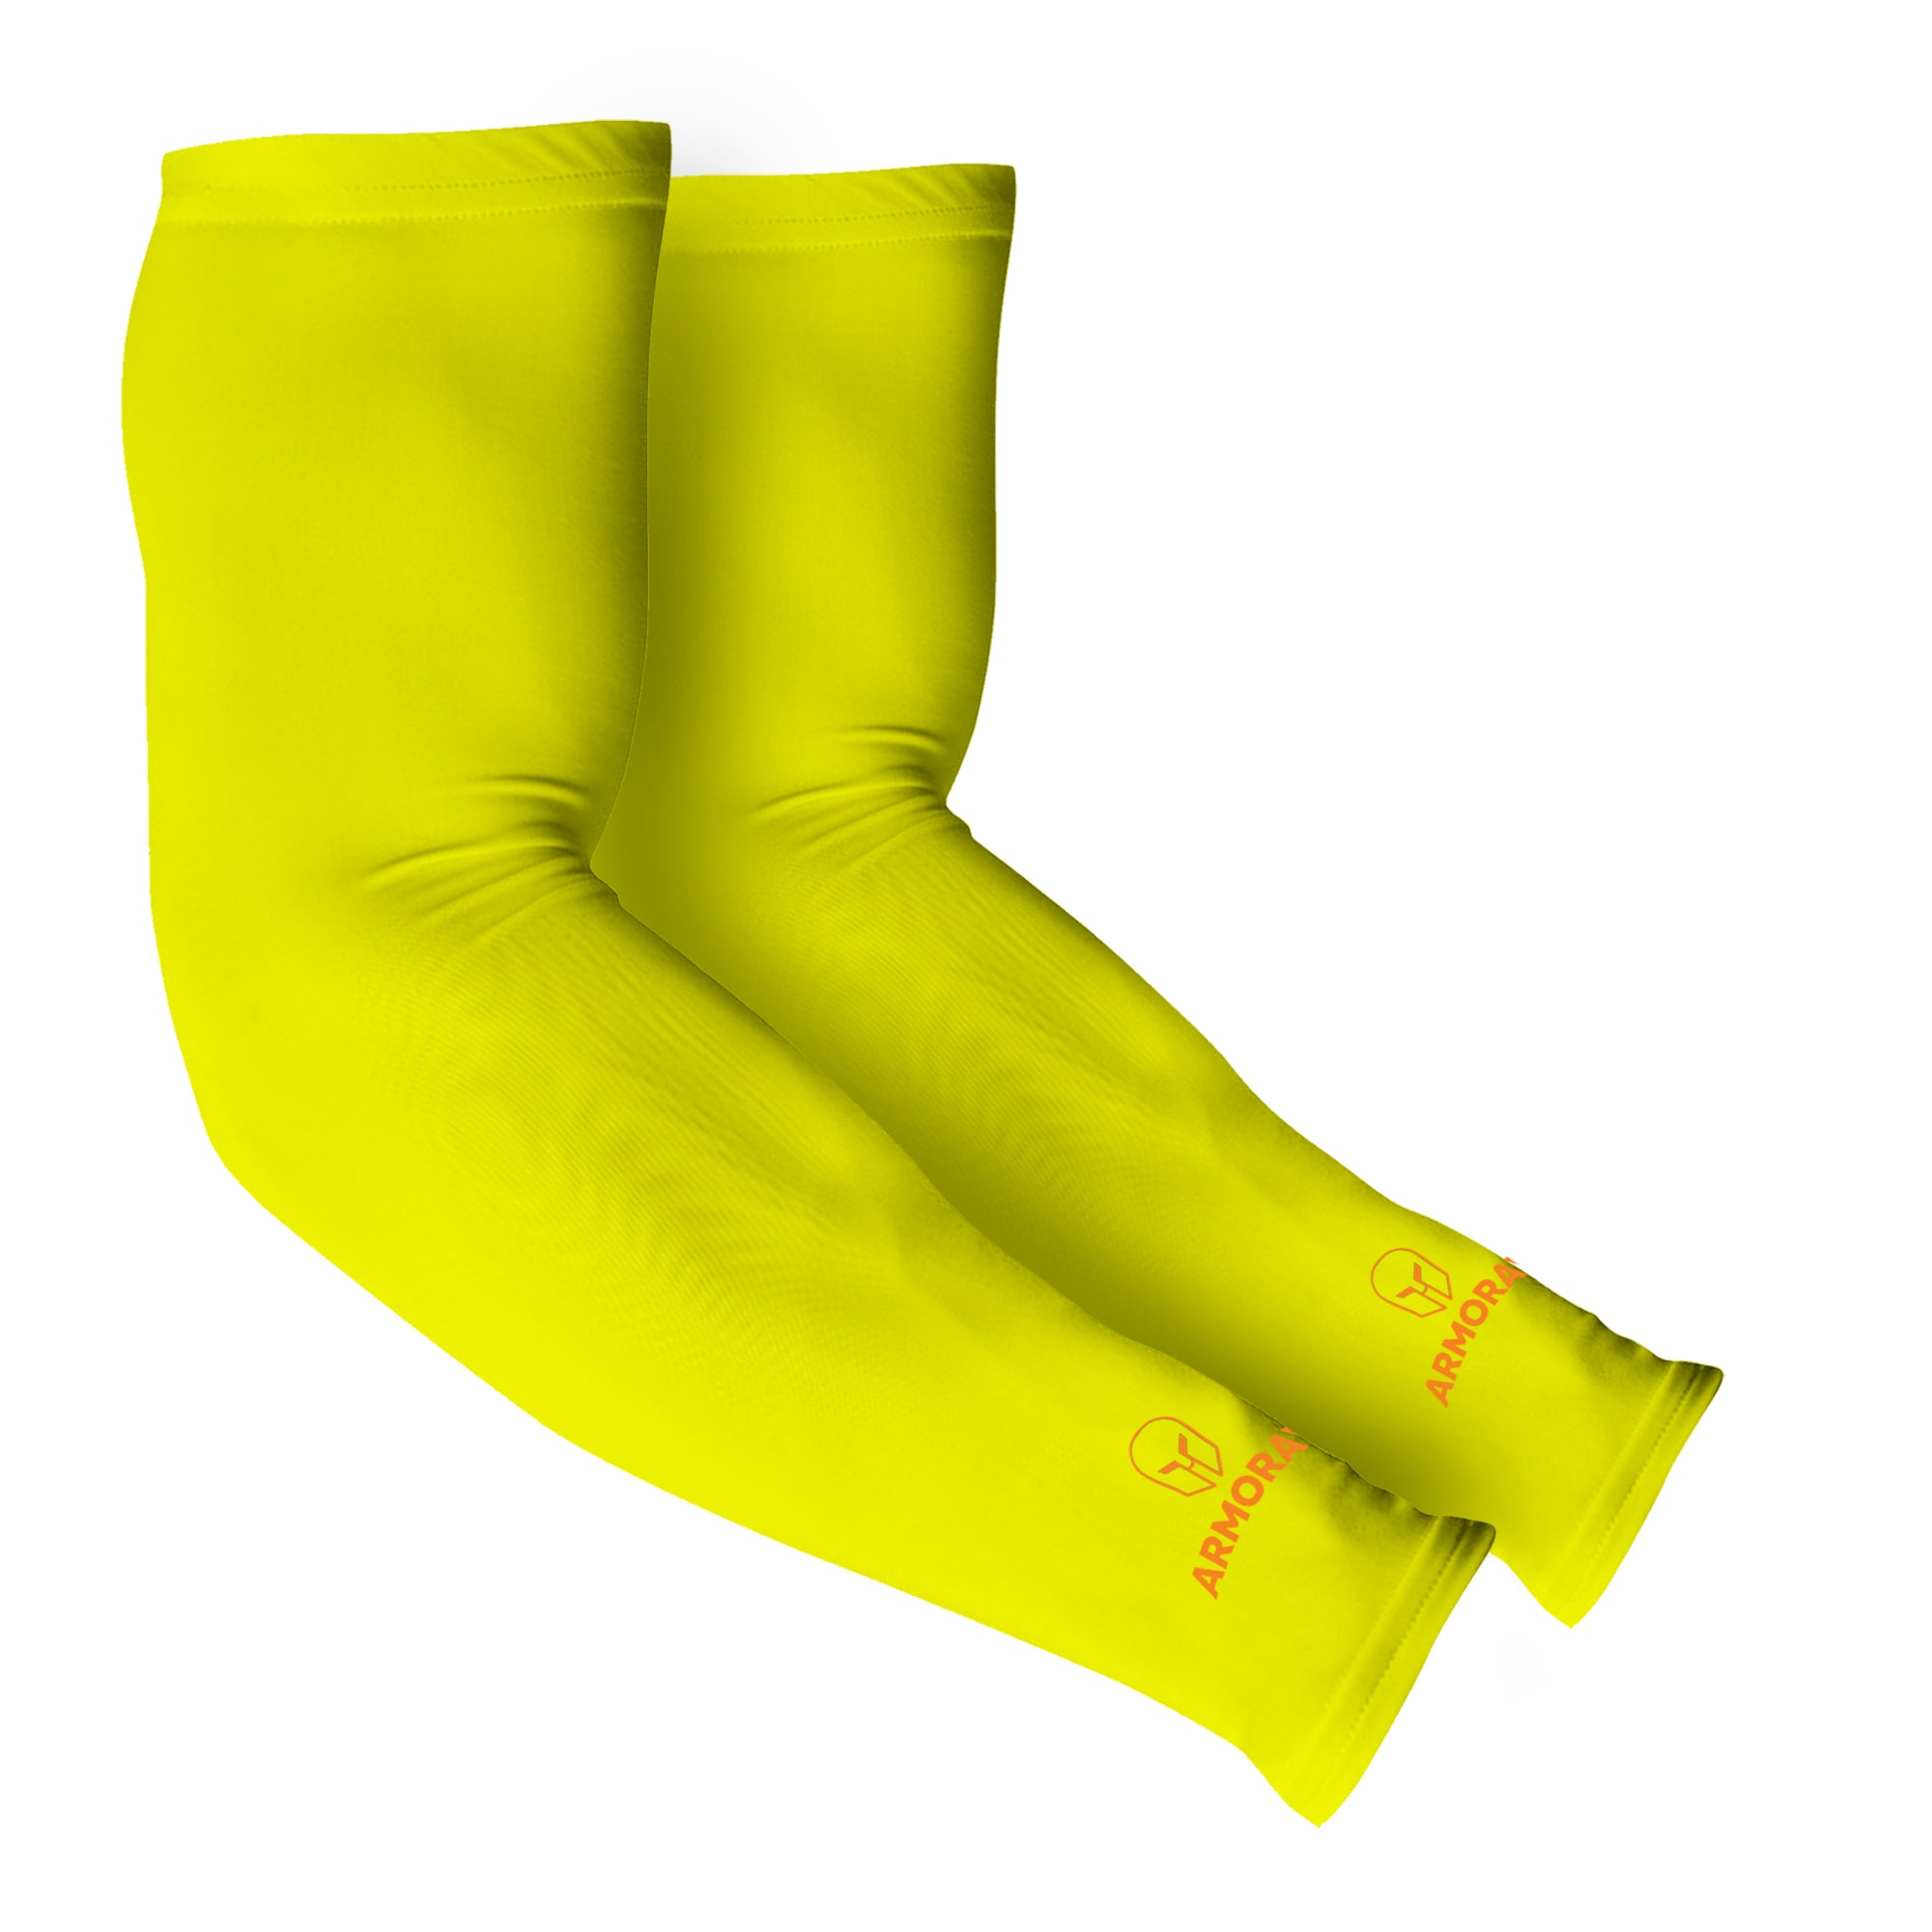 Golden Arm Sleeves (Pack of 3)